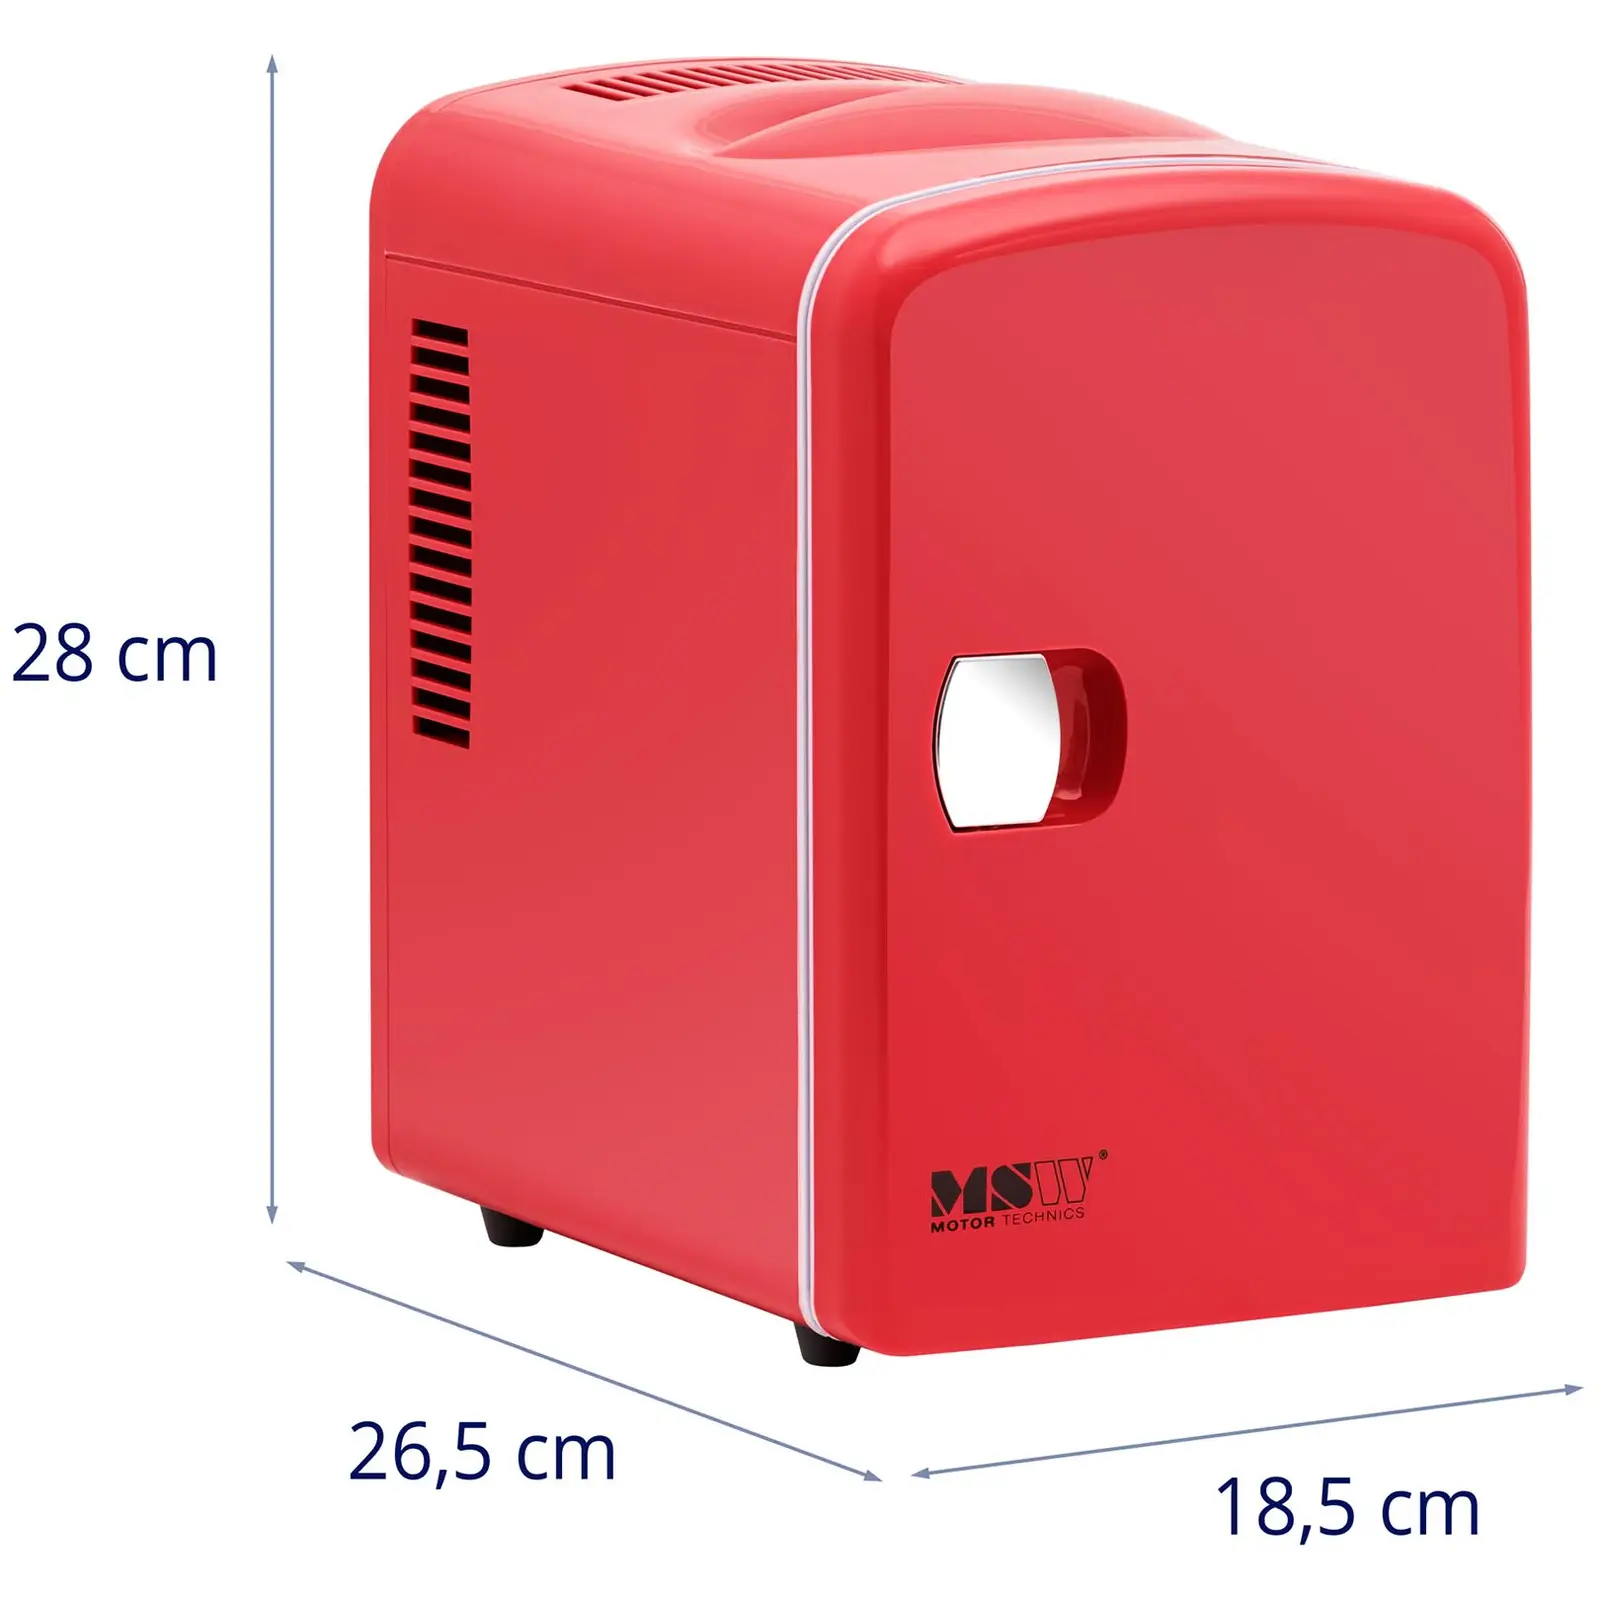 Mini Refrigerator 12 V / 230 V - 2-in-1 appliance with keep-warm function - 4 L - Red